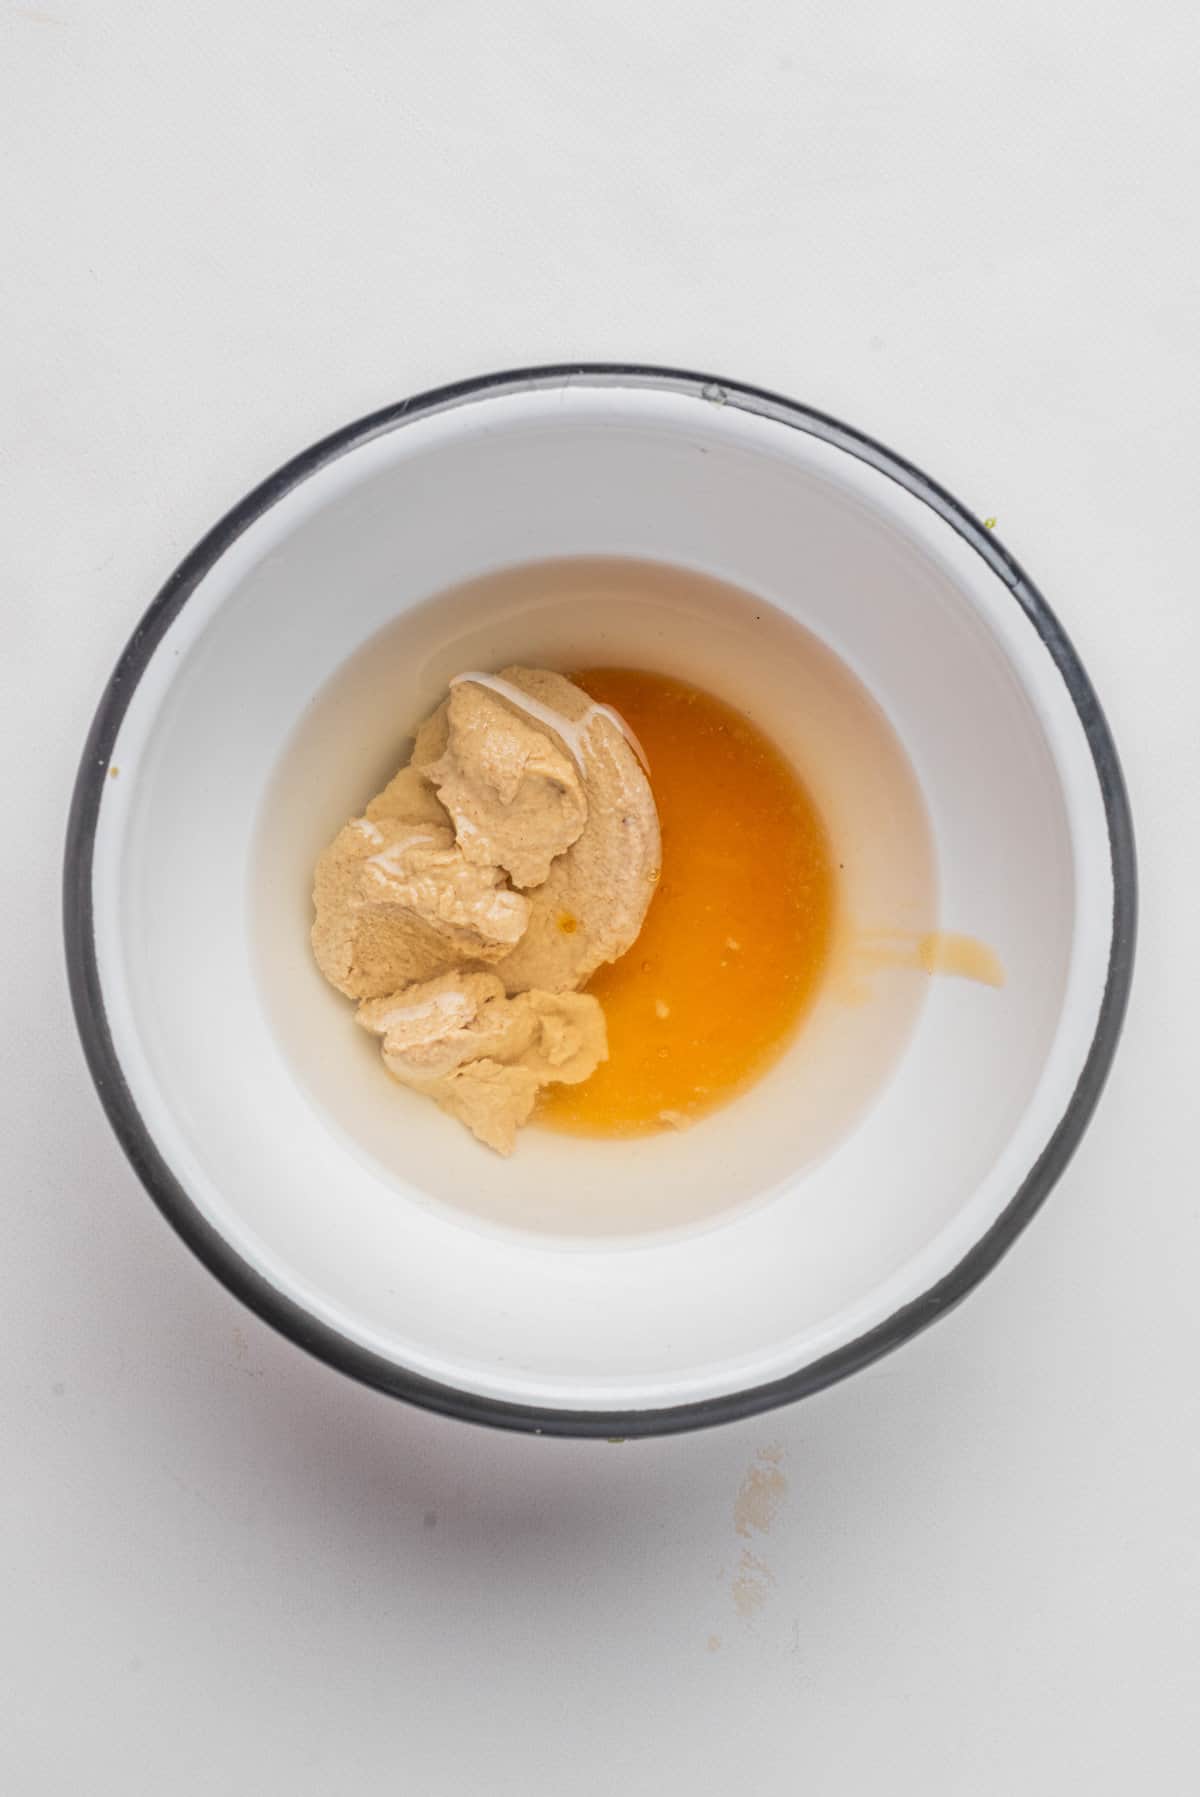 An image of champagne vinaigrette being mixed in a bowl.